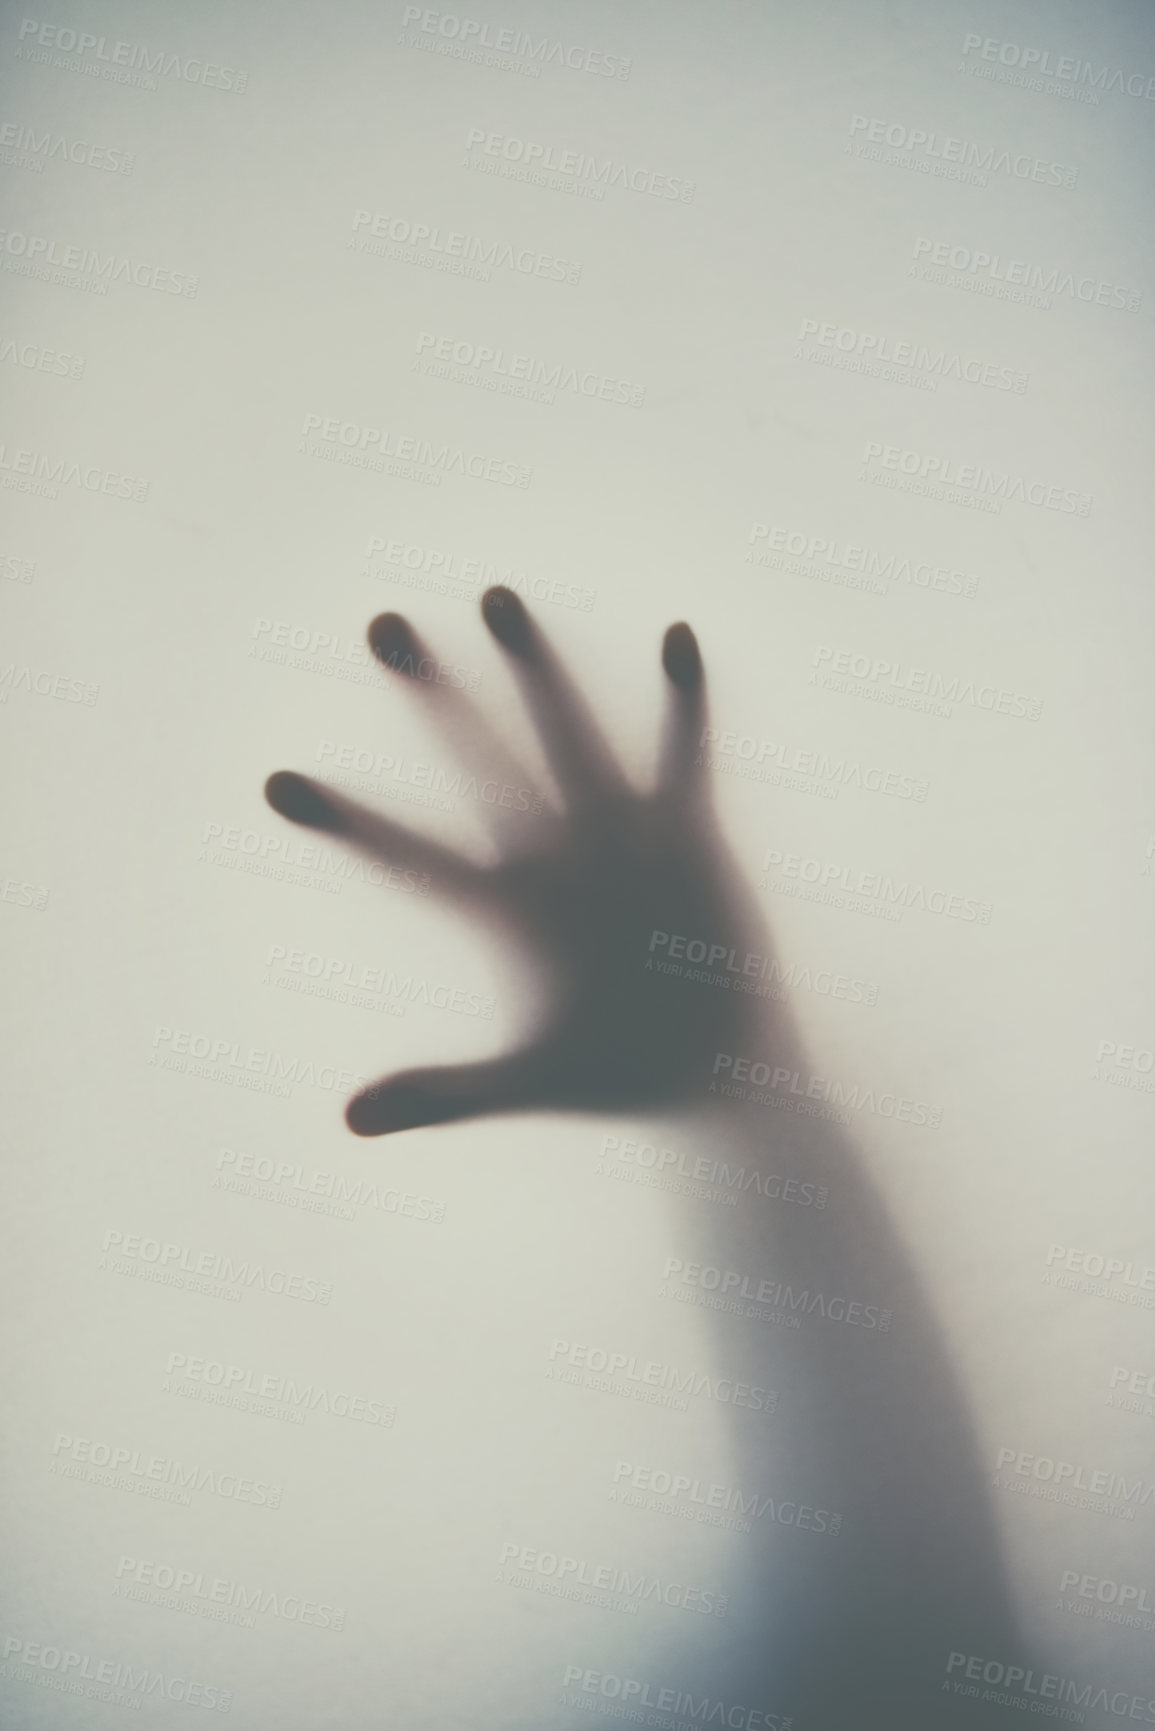 Buy stock photo Defocussed shot of a single hand reaching out against a plain background